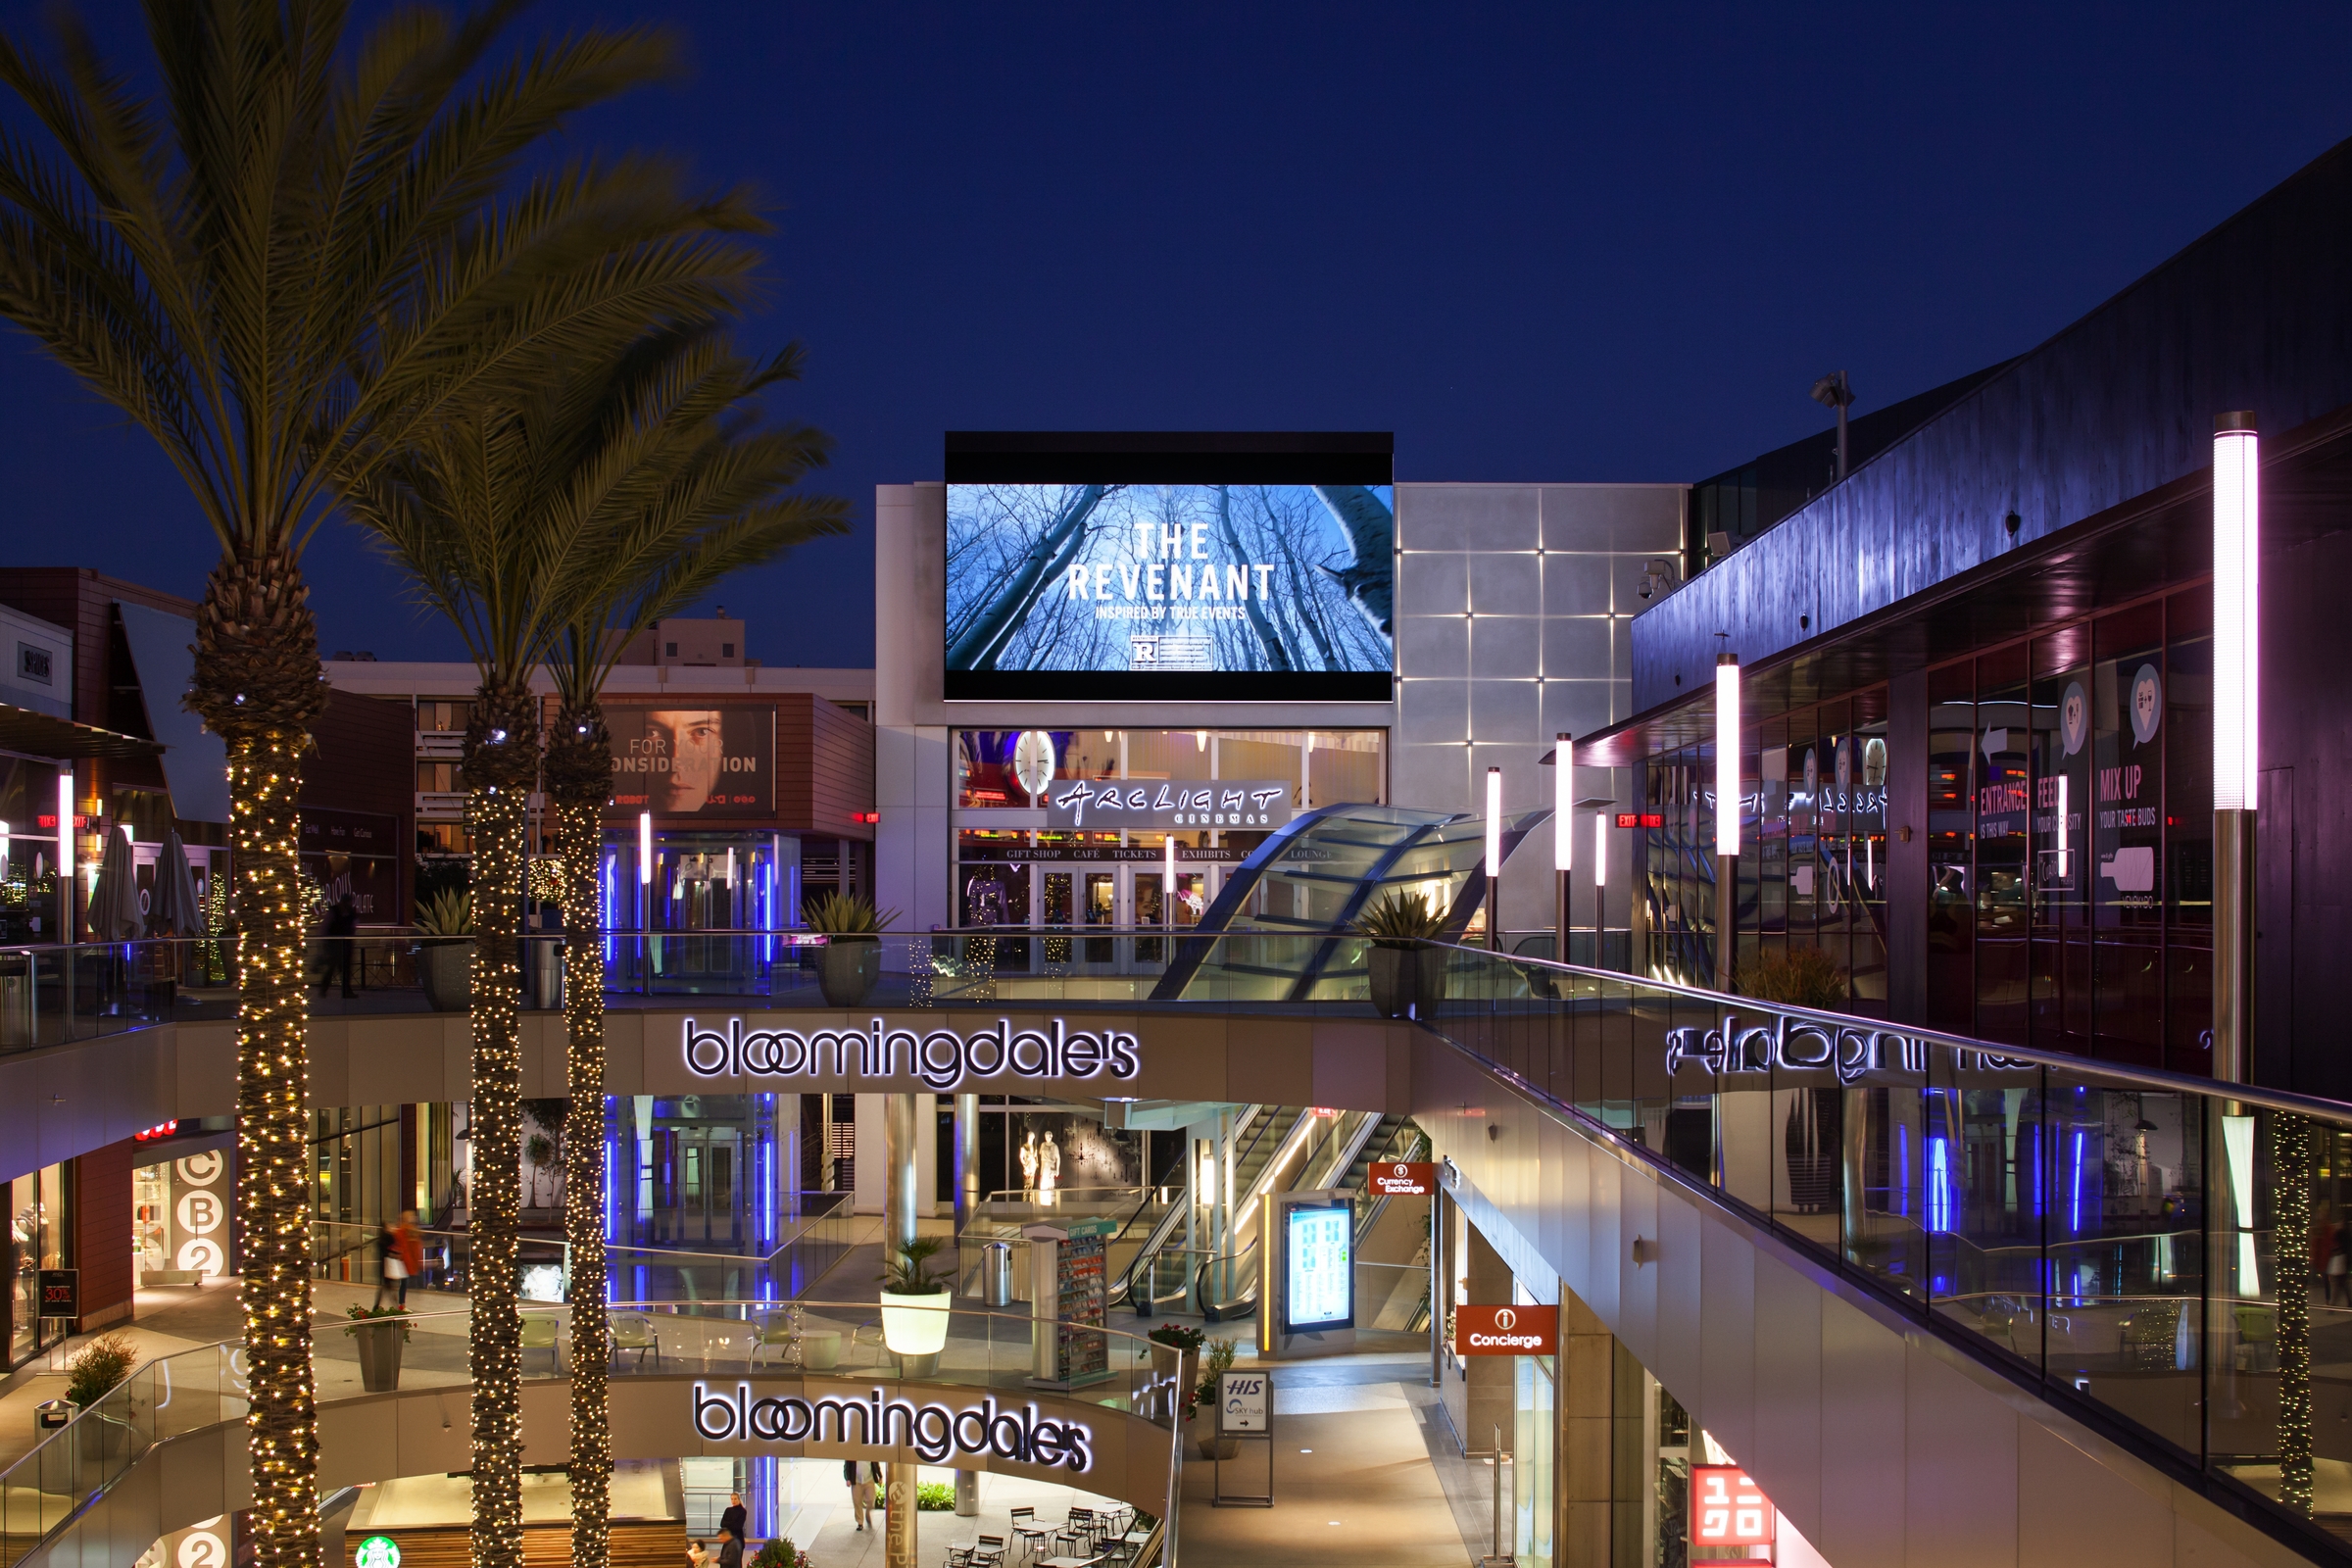 Macerich's New Santa Monica Place Opens With Bloomingdale's and 50+  Retailers and Restaurants